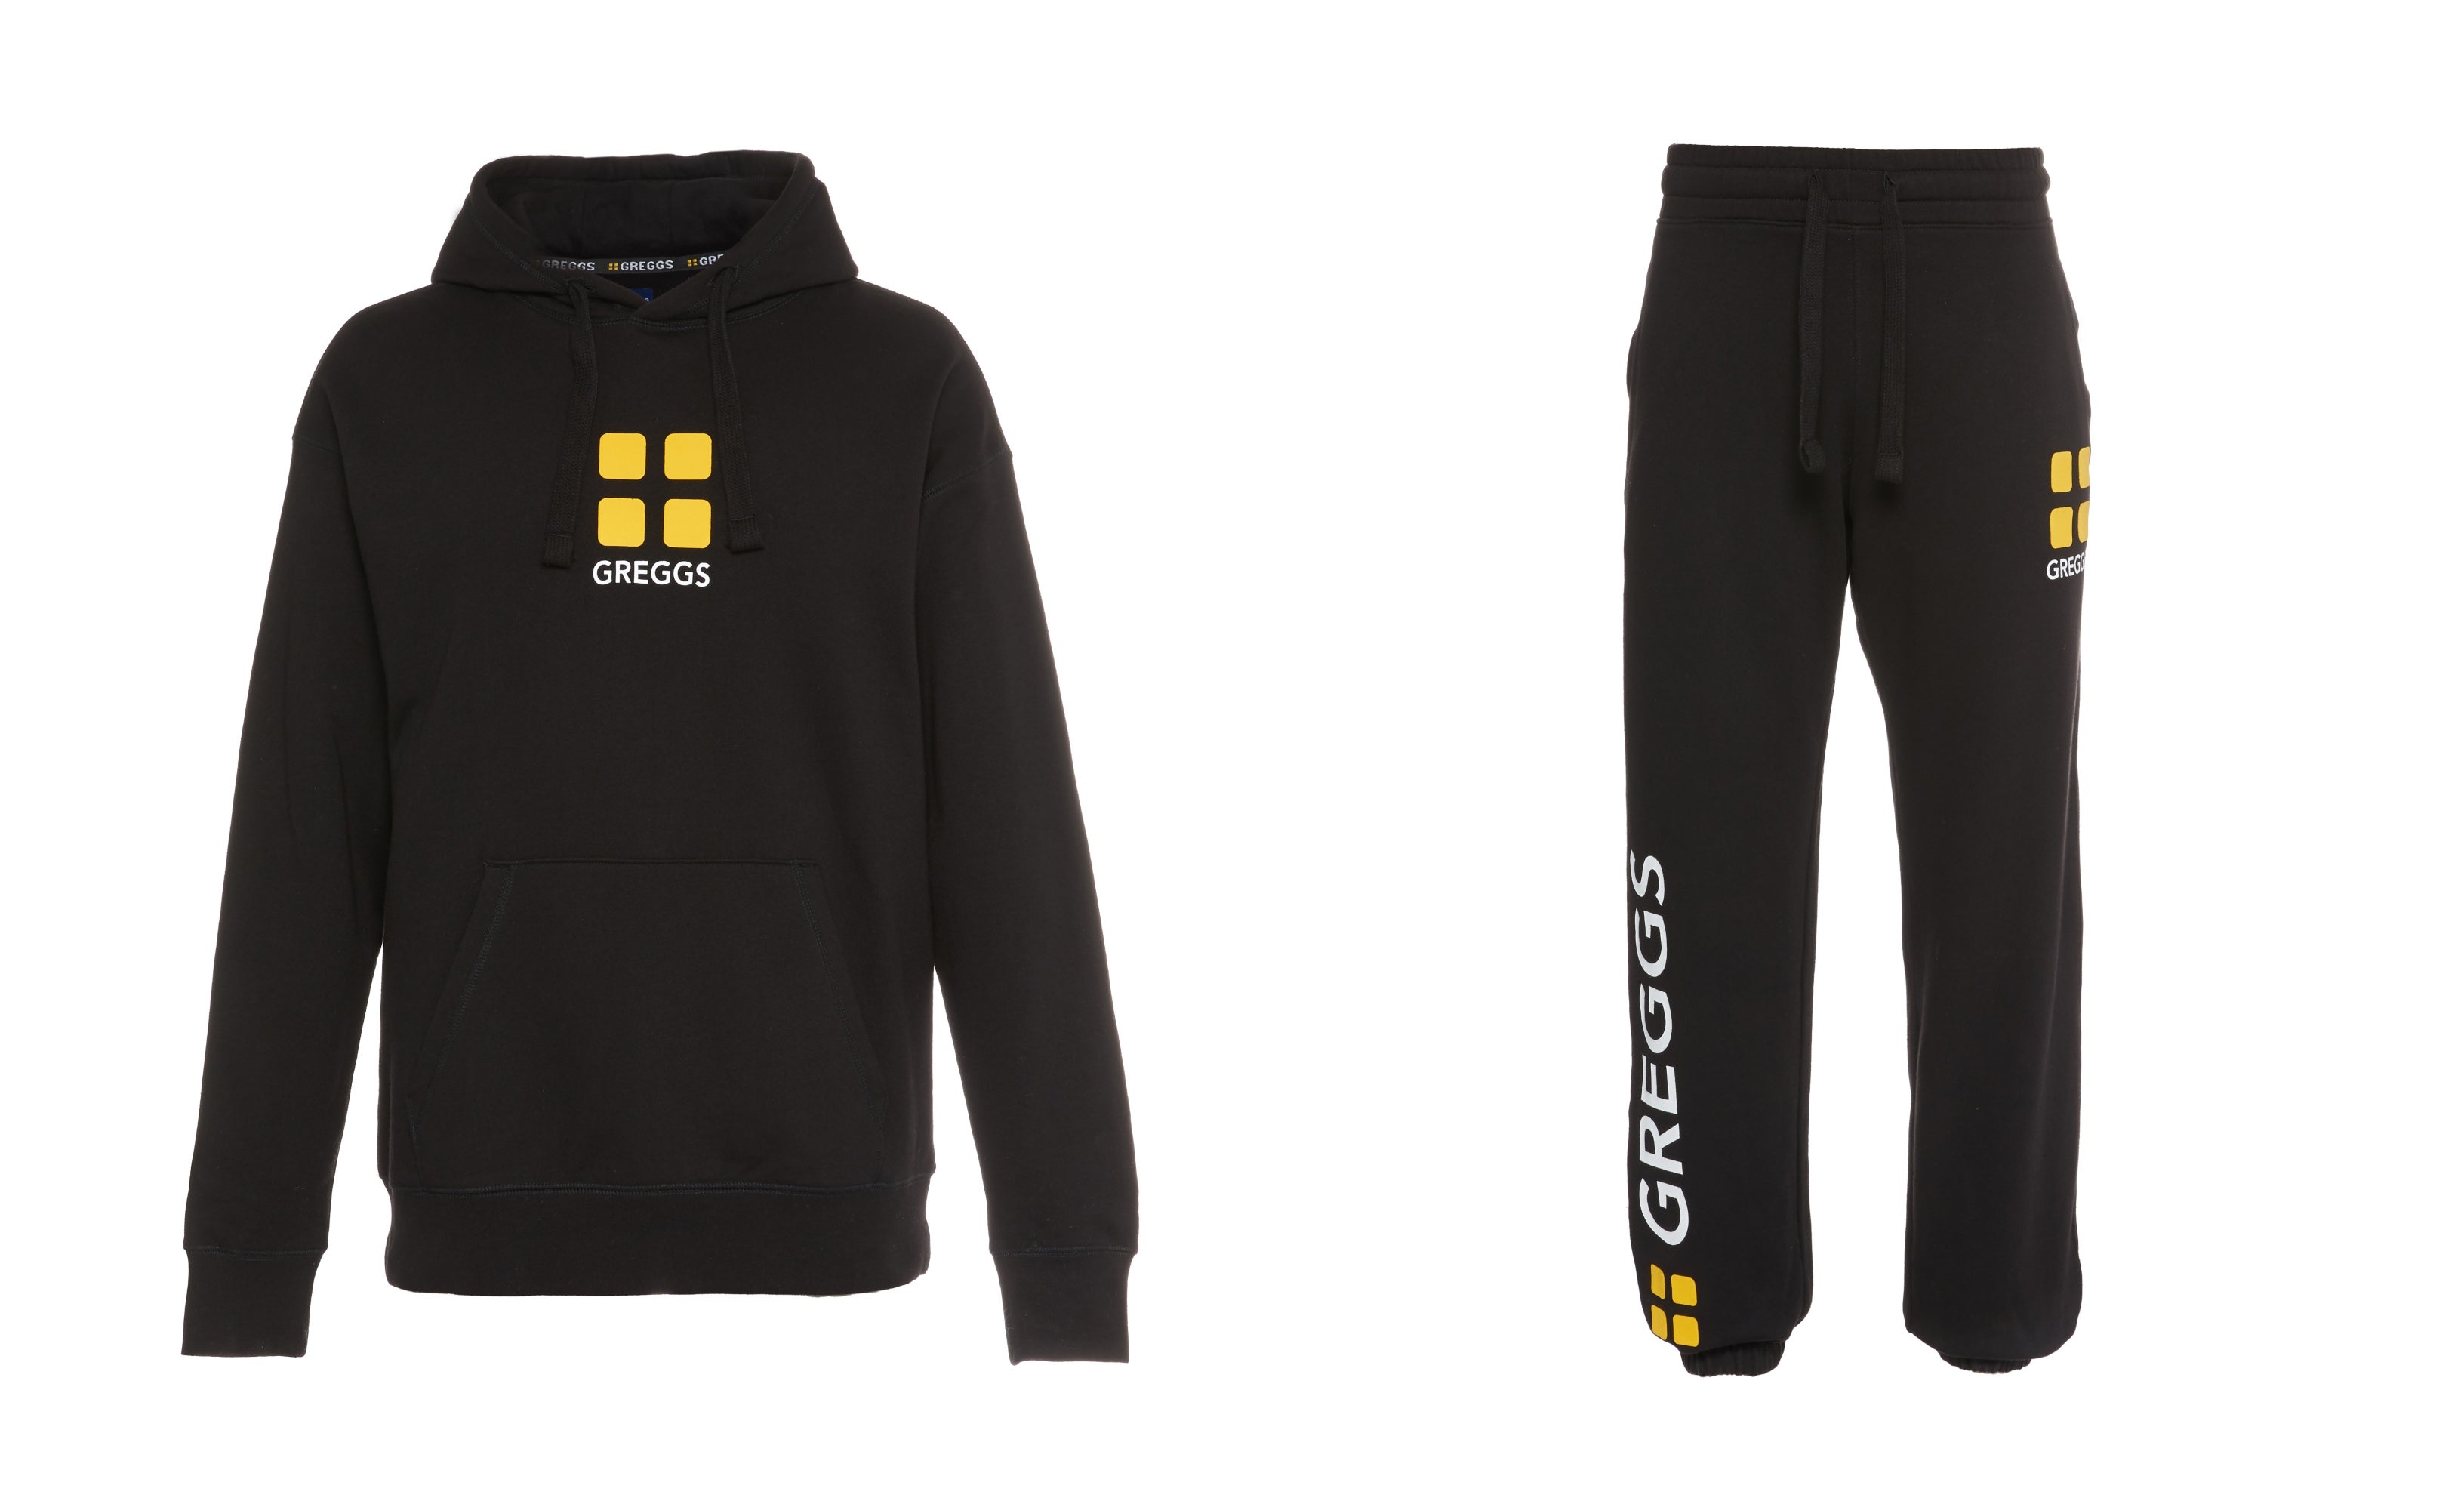 The collection features a tracksuit